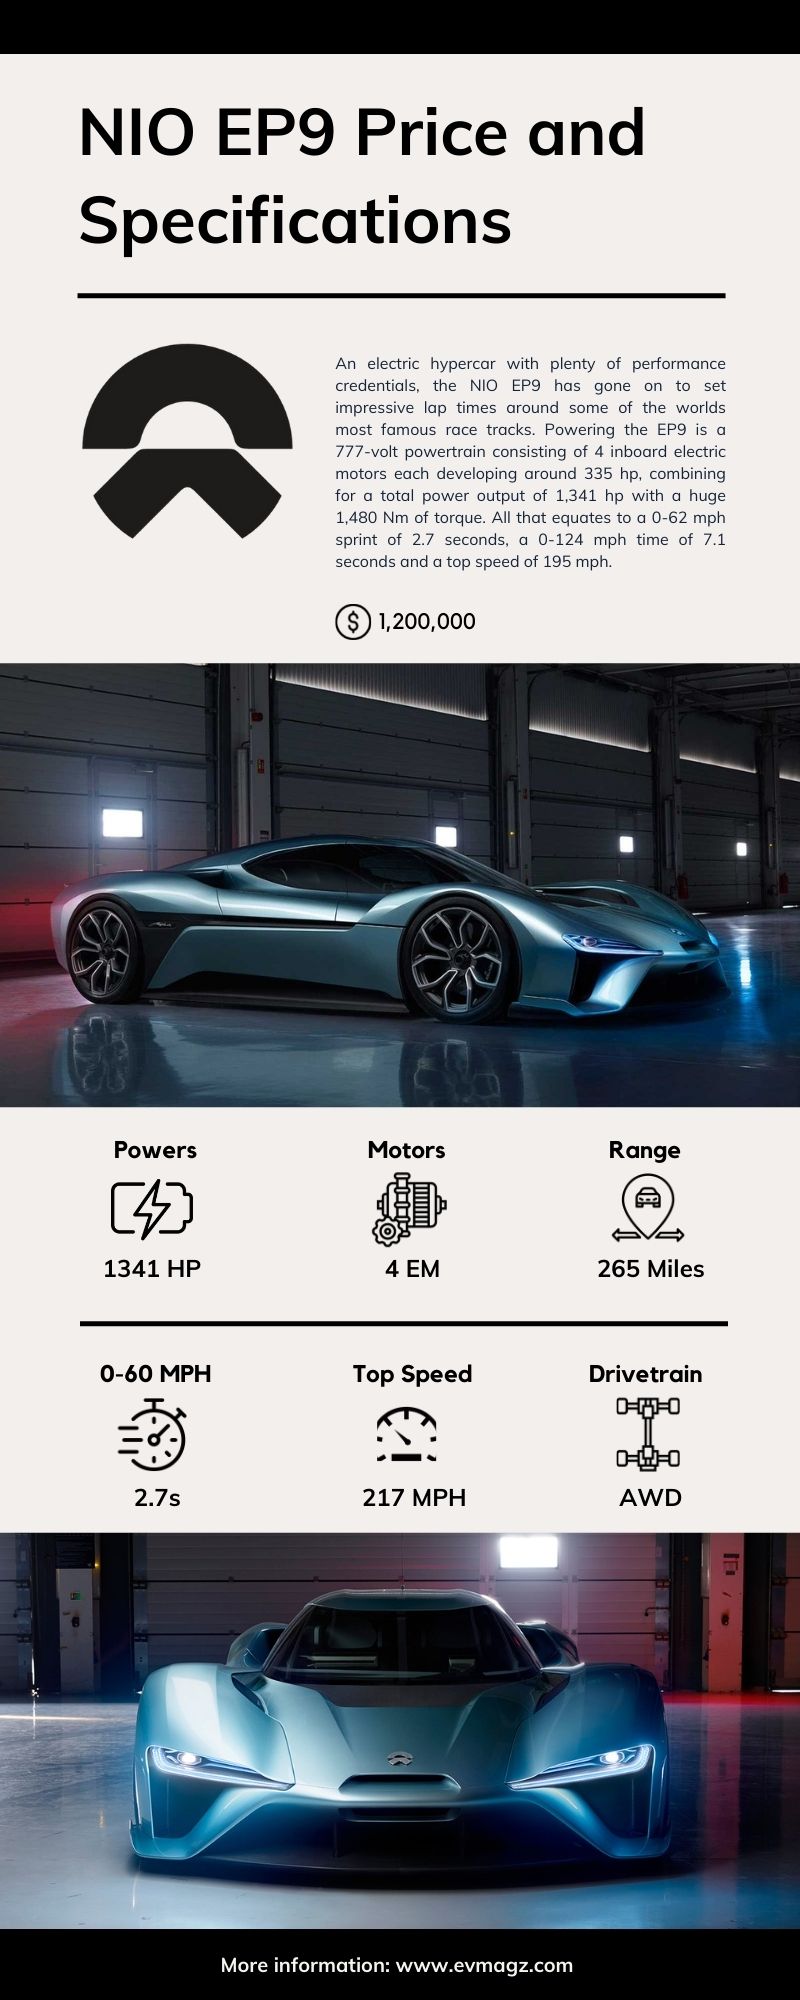 NIO EP9 Price and Specifications Infographic